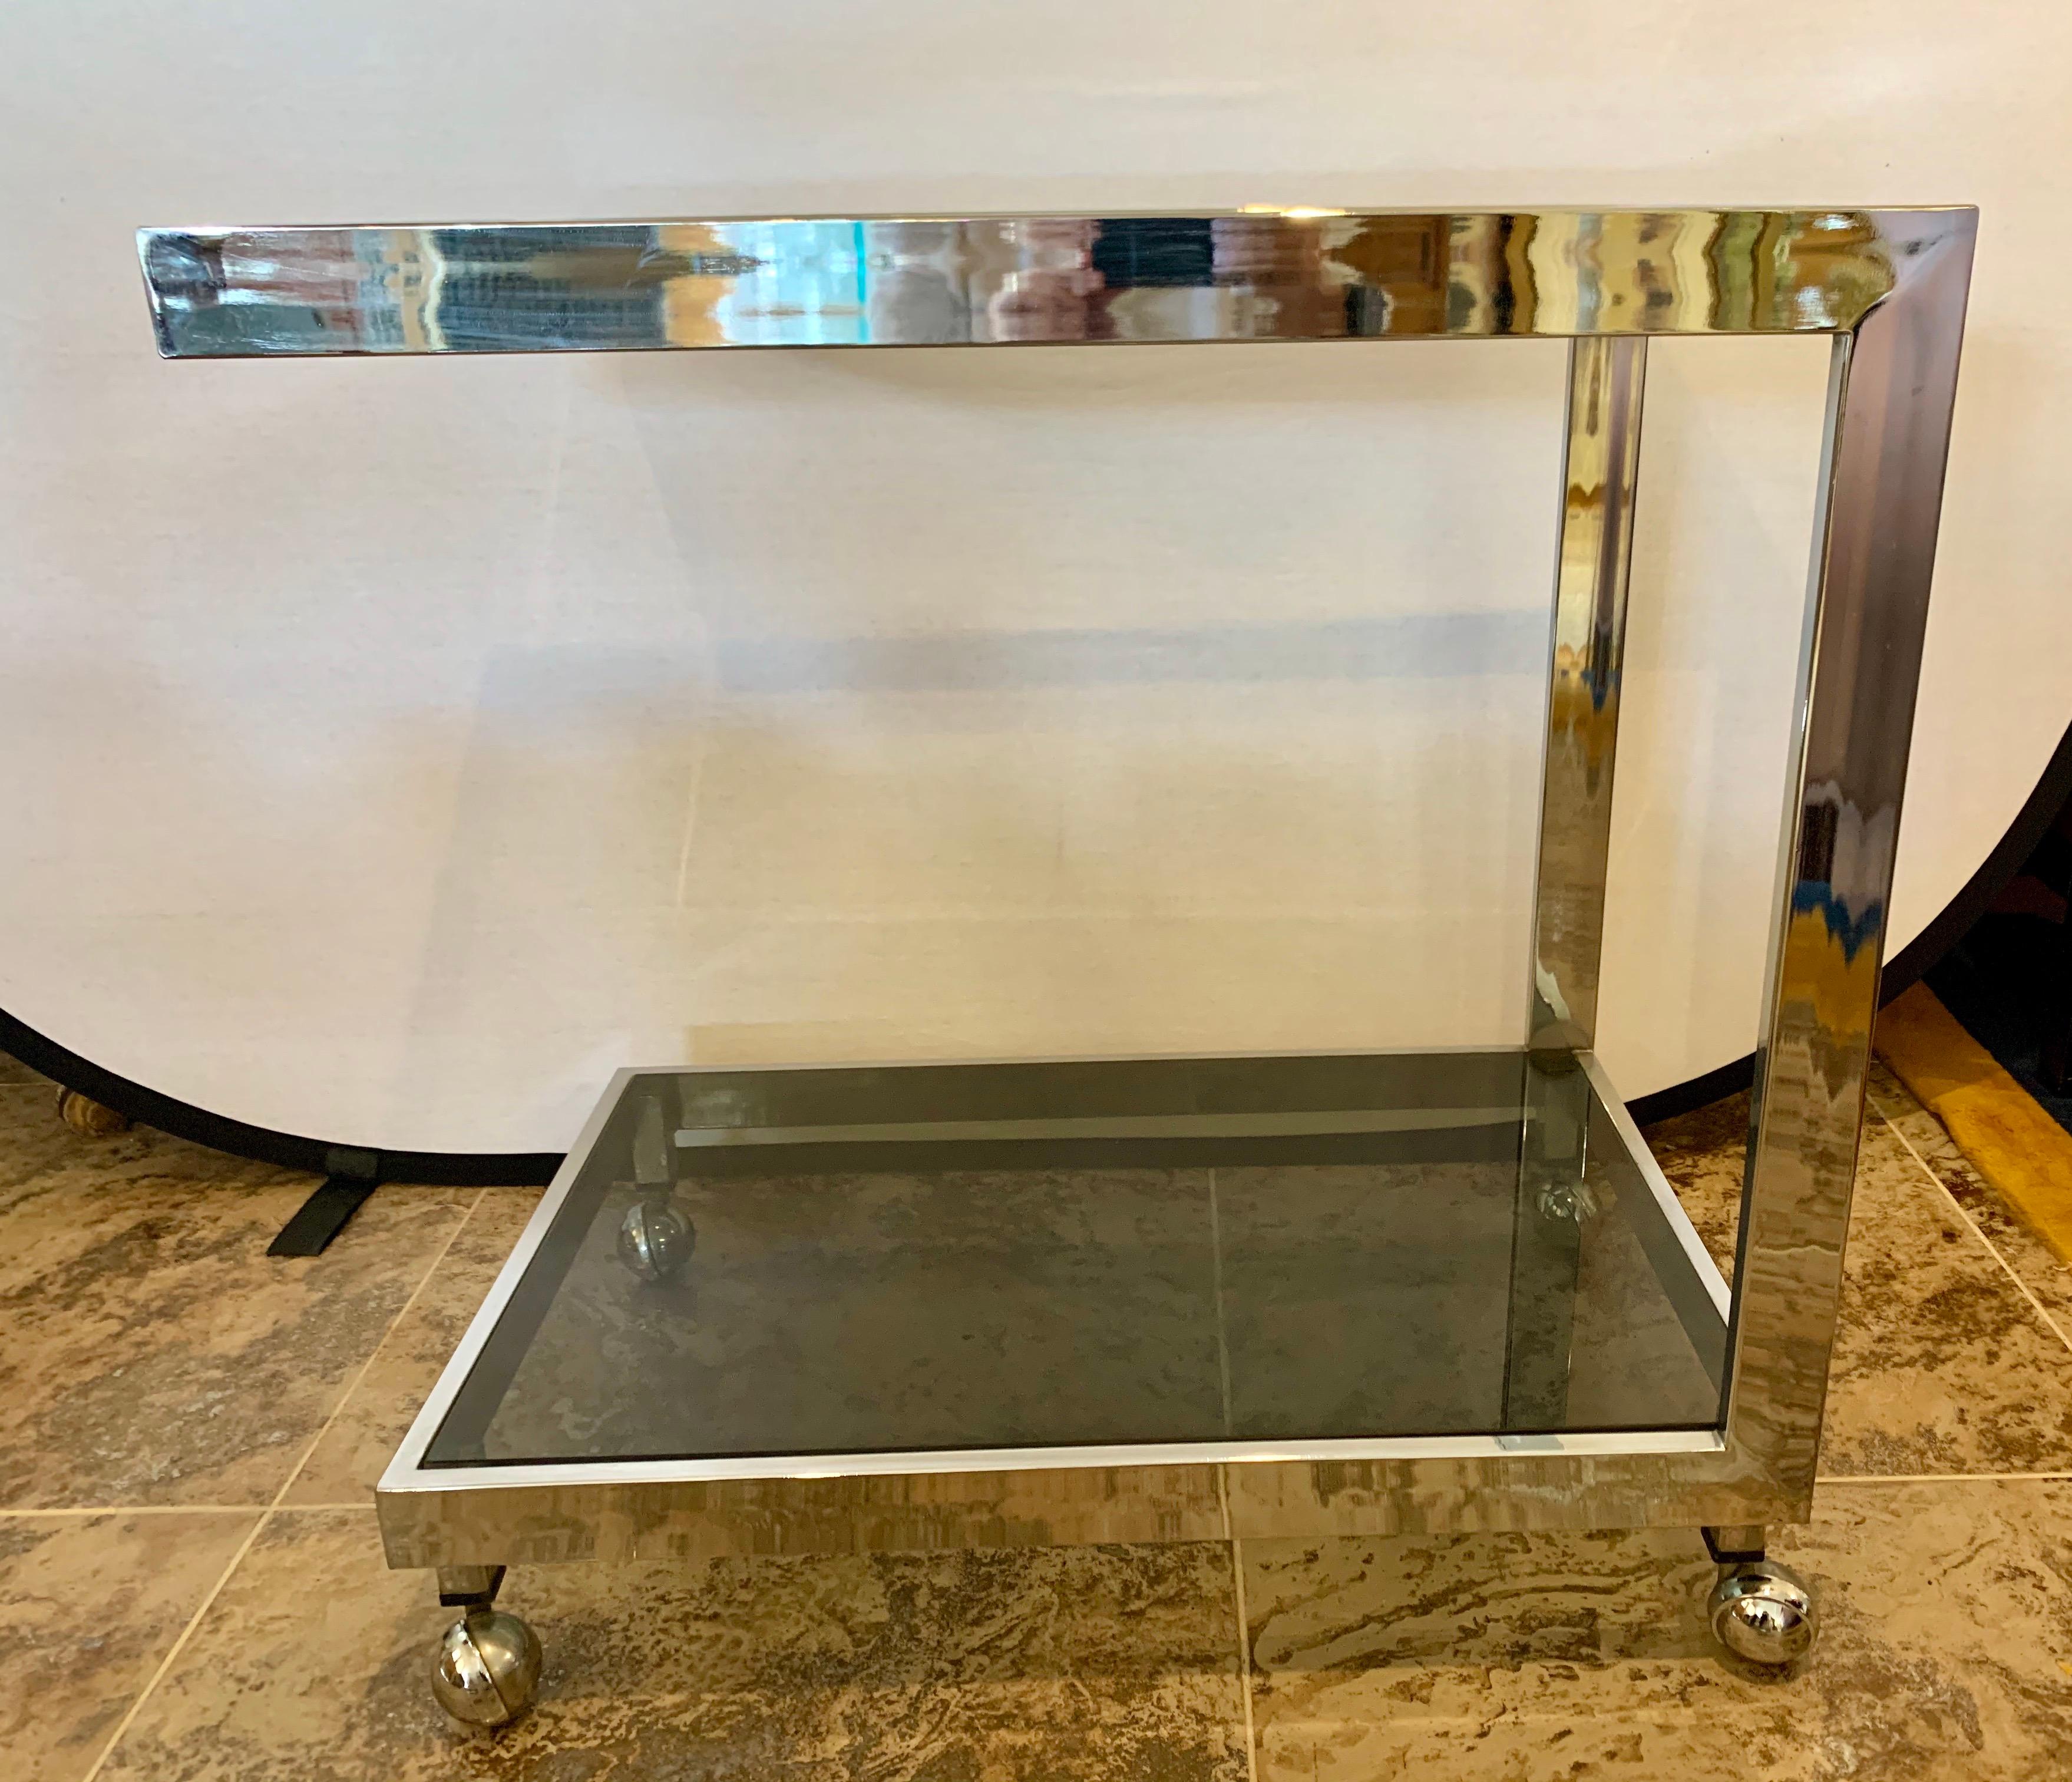 Iconic midcentury rolling bar cart with two tiers. The glass is smoked and the chrome is thick and gorgeous. Rolls as it should. One small chip at corner underside of glass that can't be seen.